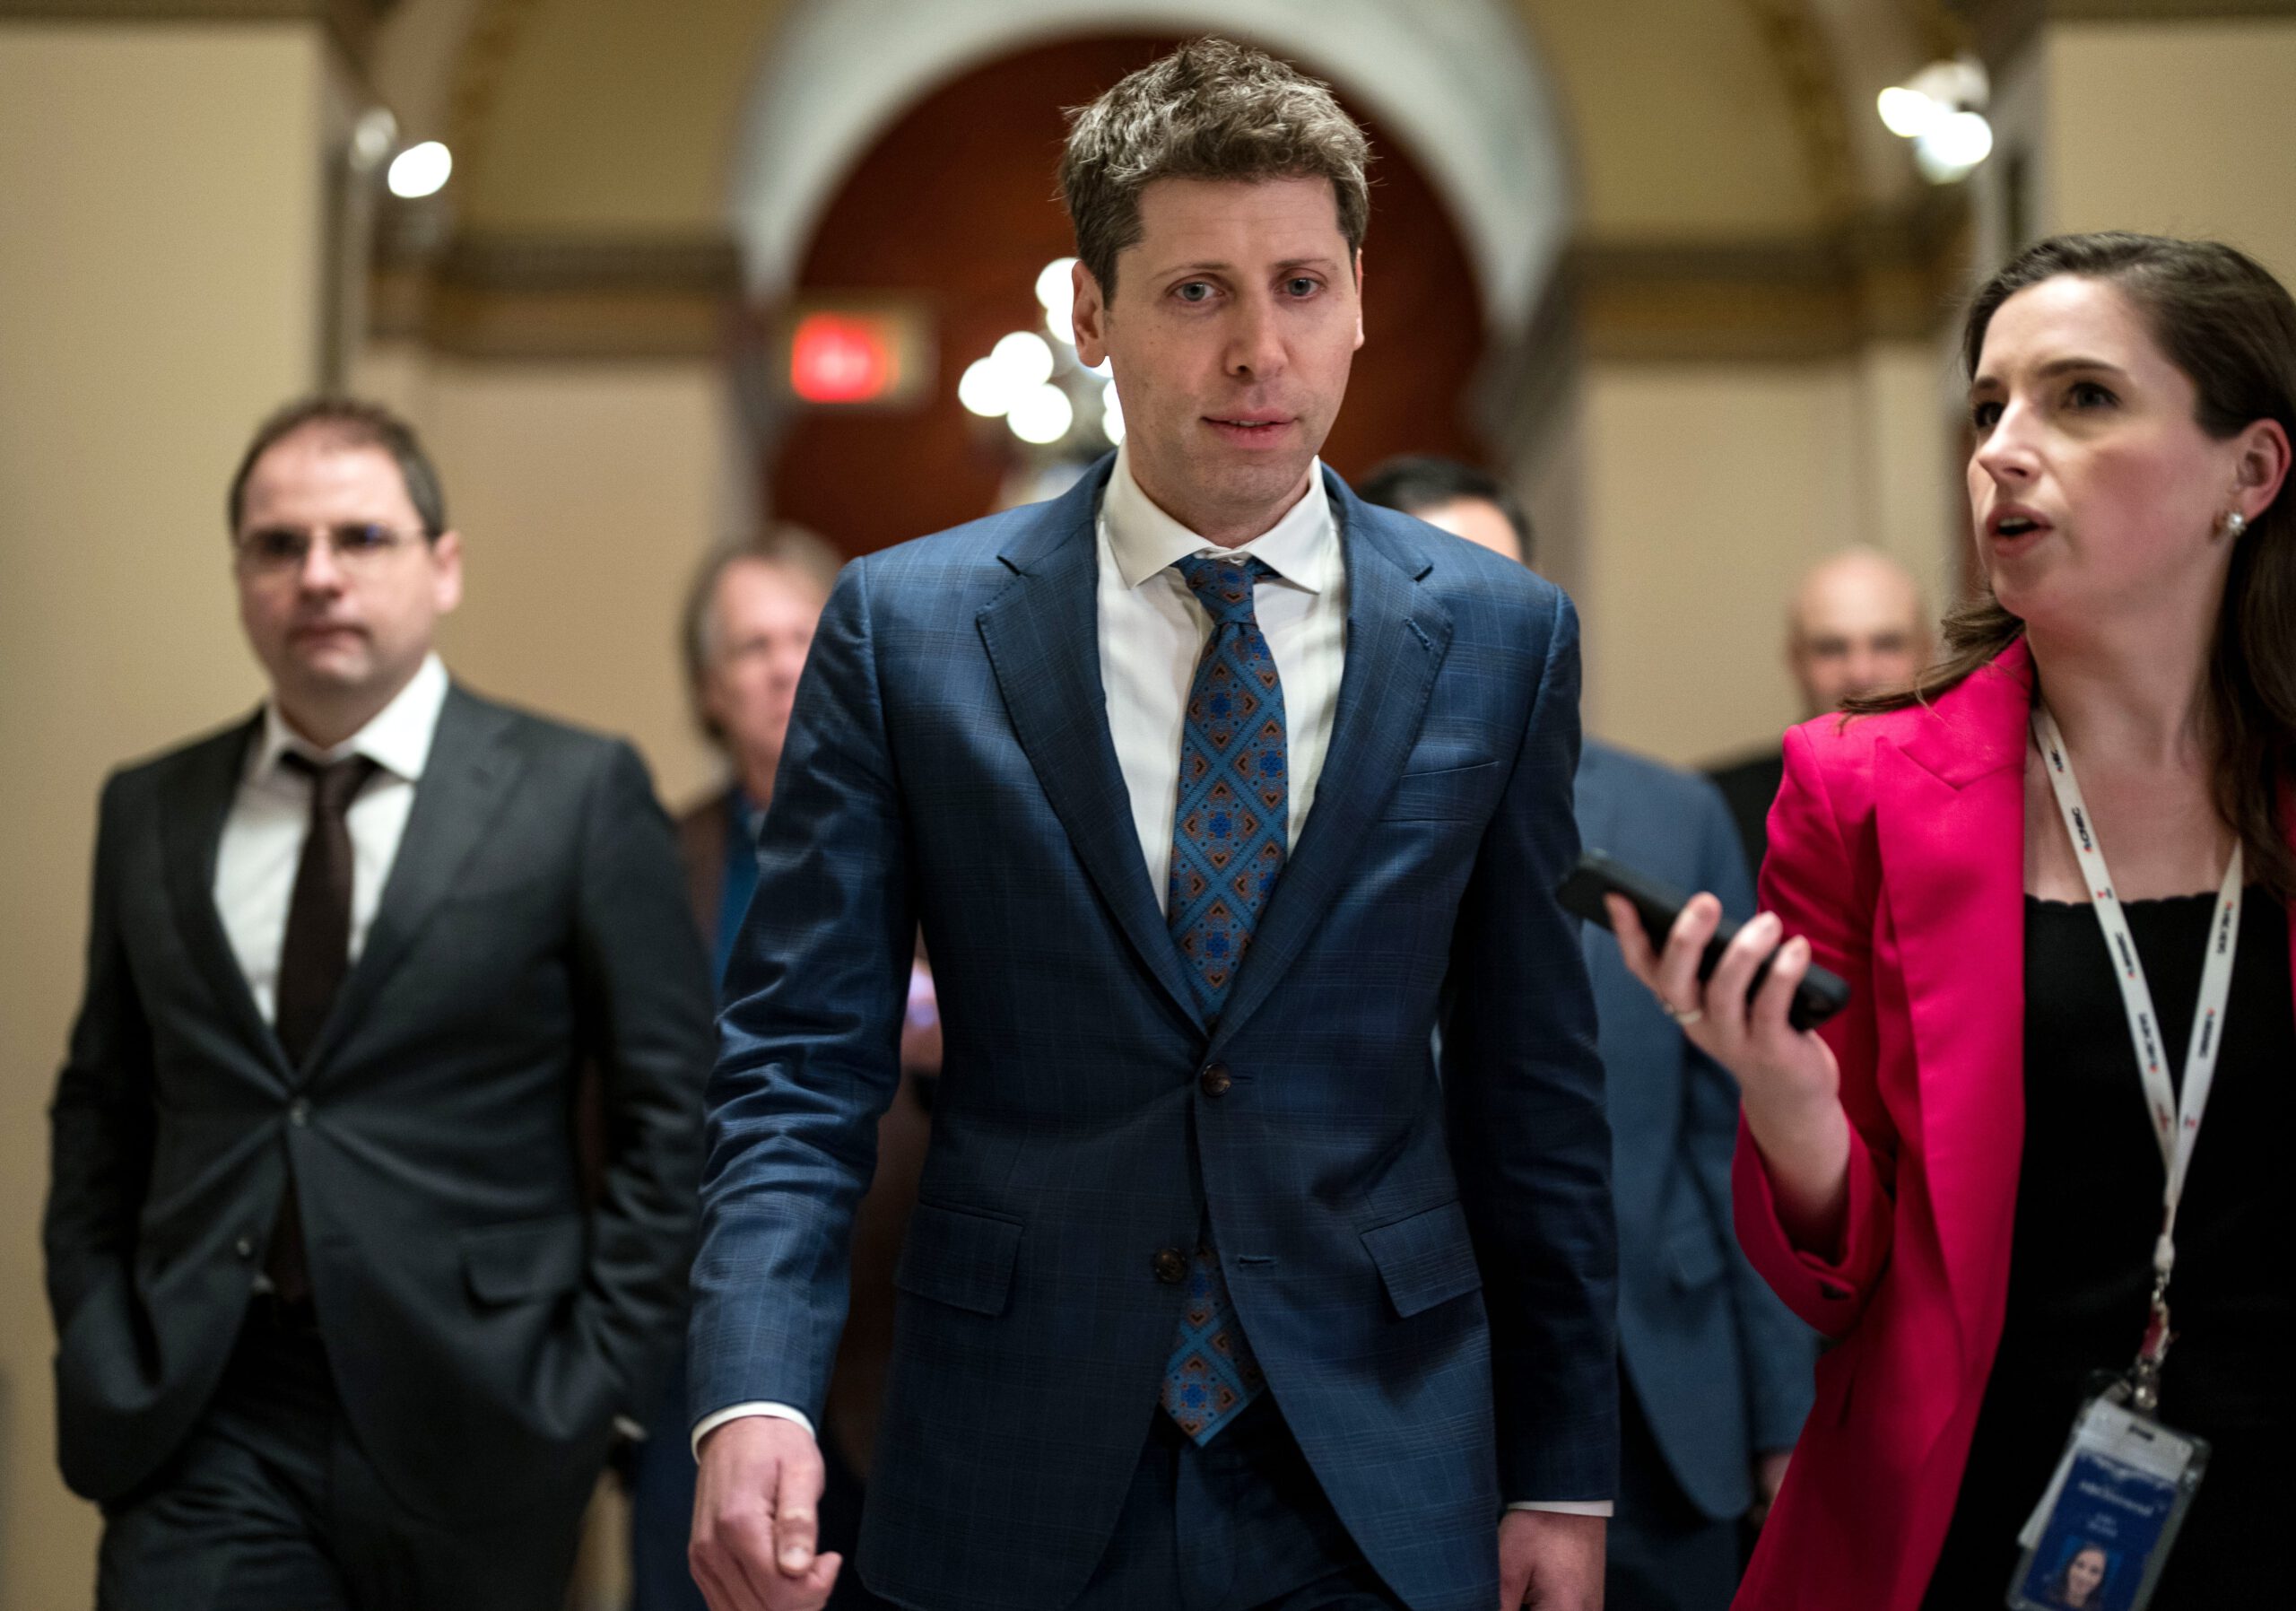 Sam Altman, center, in a dark blue suit, flanked to his left by a woman in red who appears to be speaking to him.